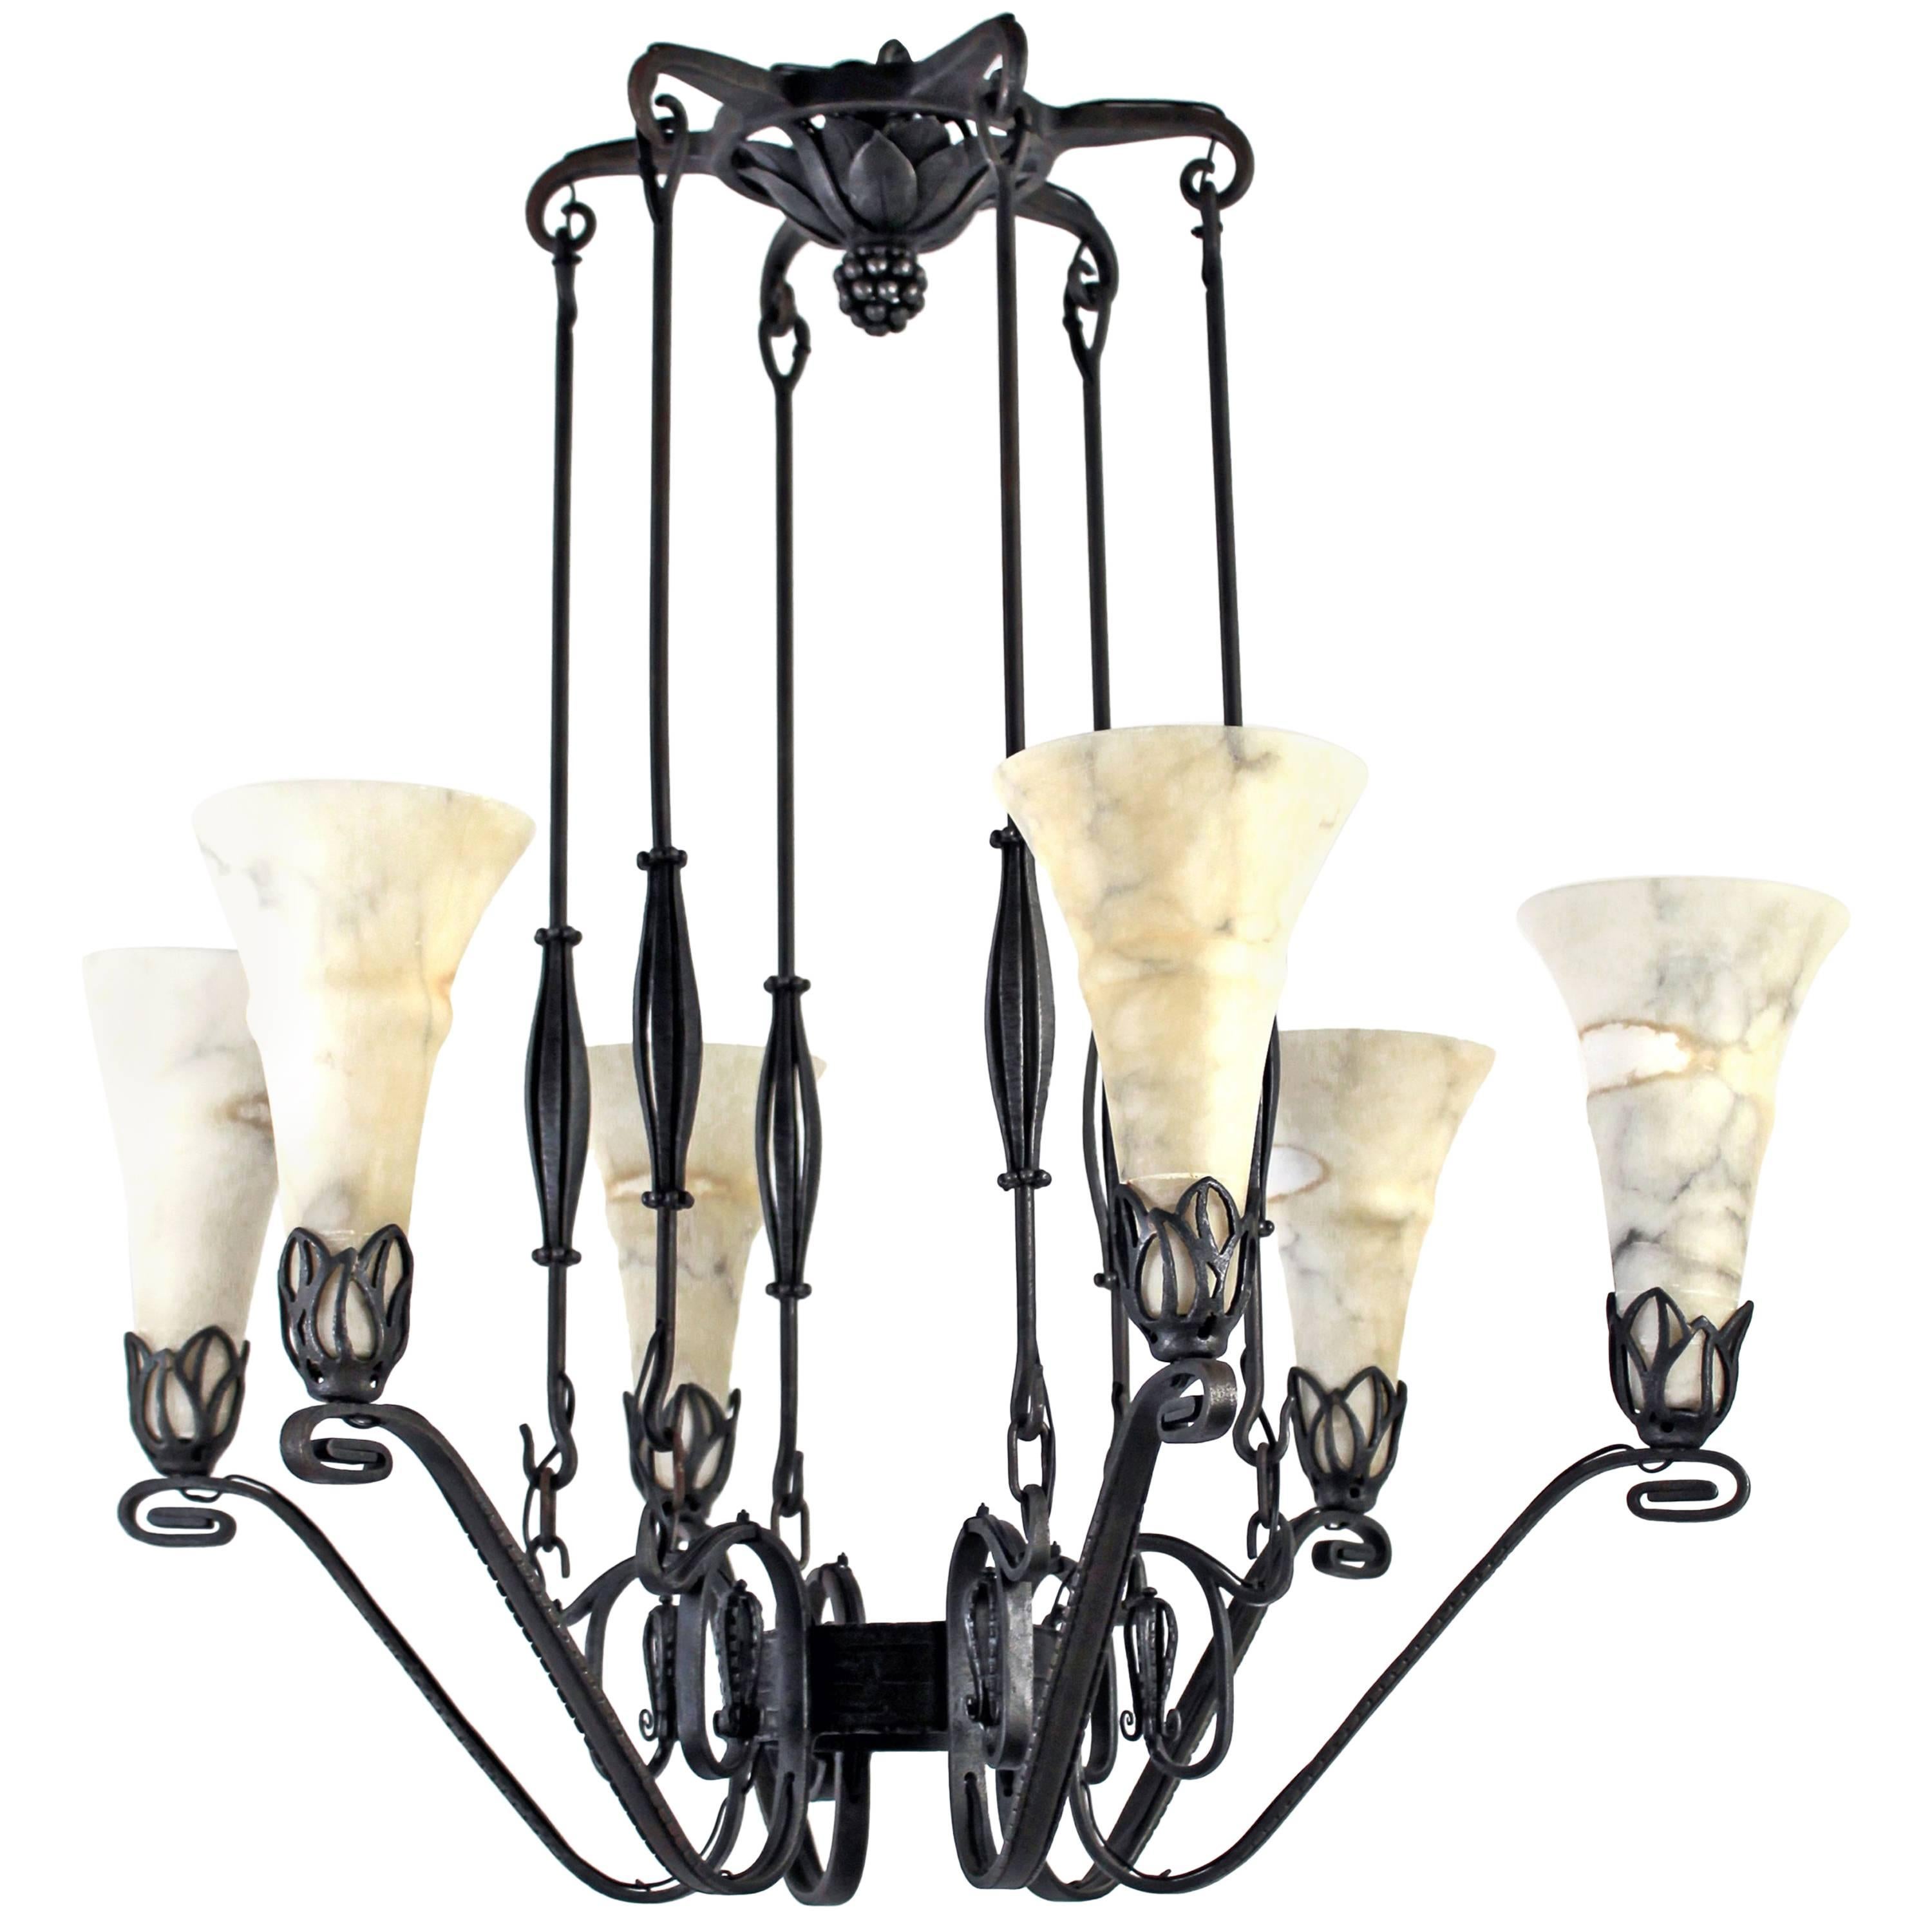 French Art Deco Wrought Iron Chandelier with Alabaster Shades by Edgar Brandt For Sale